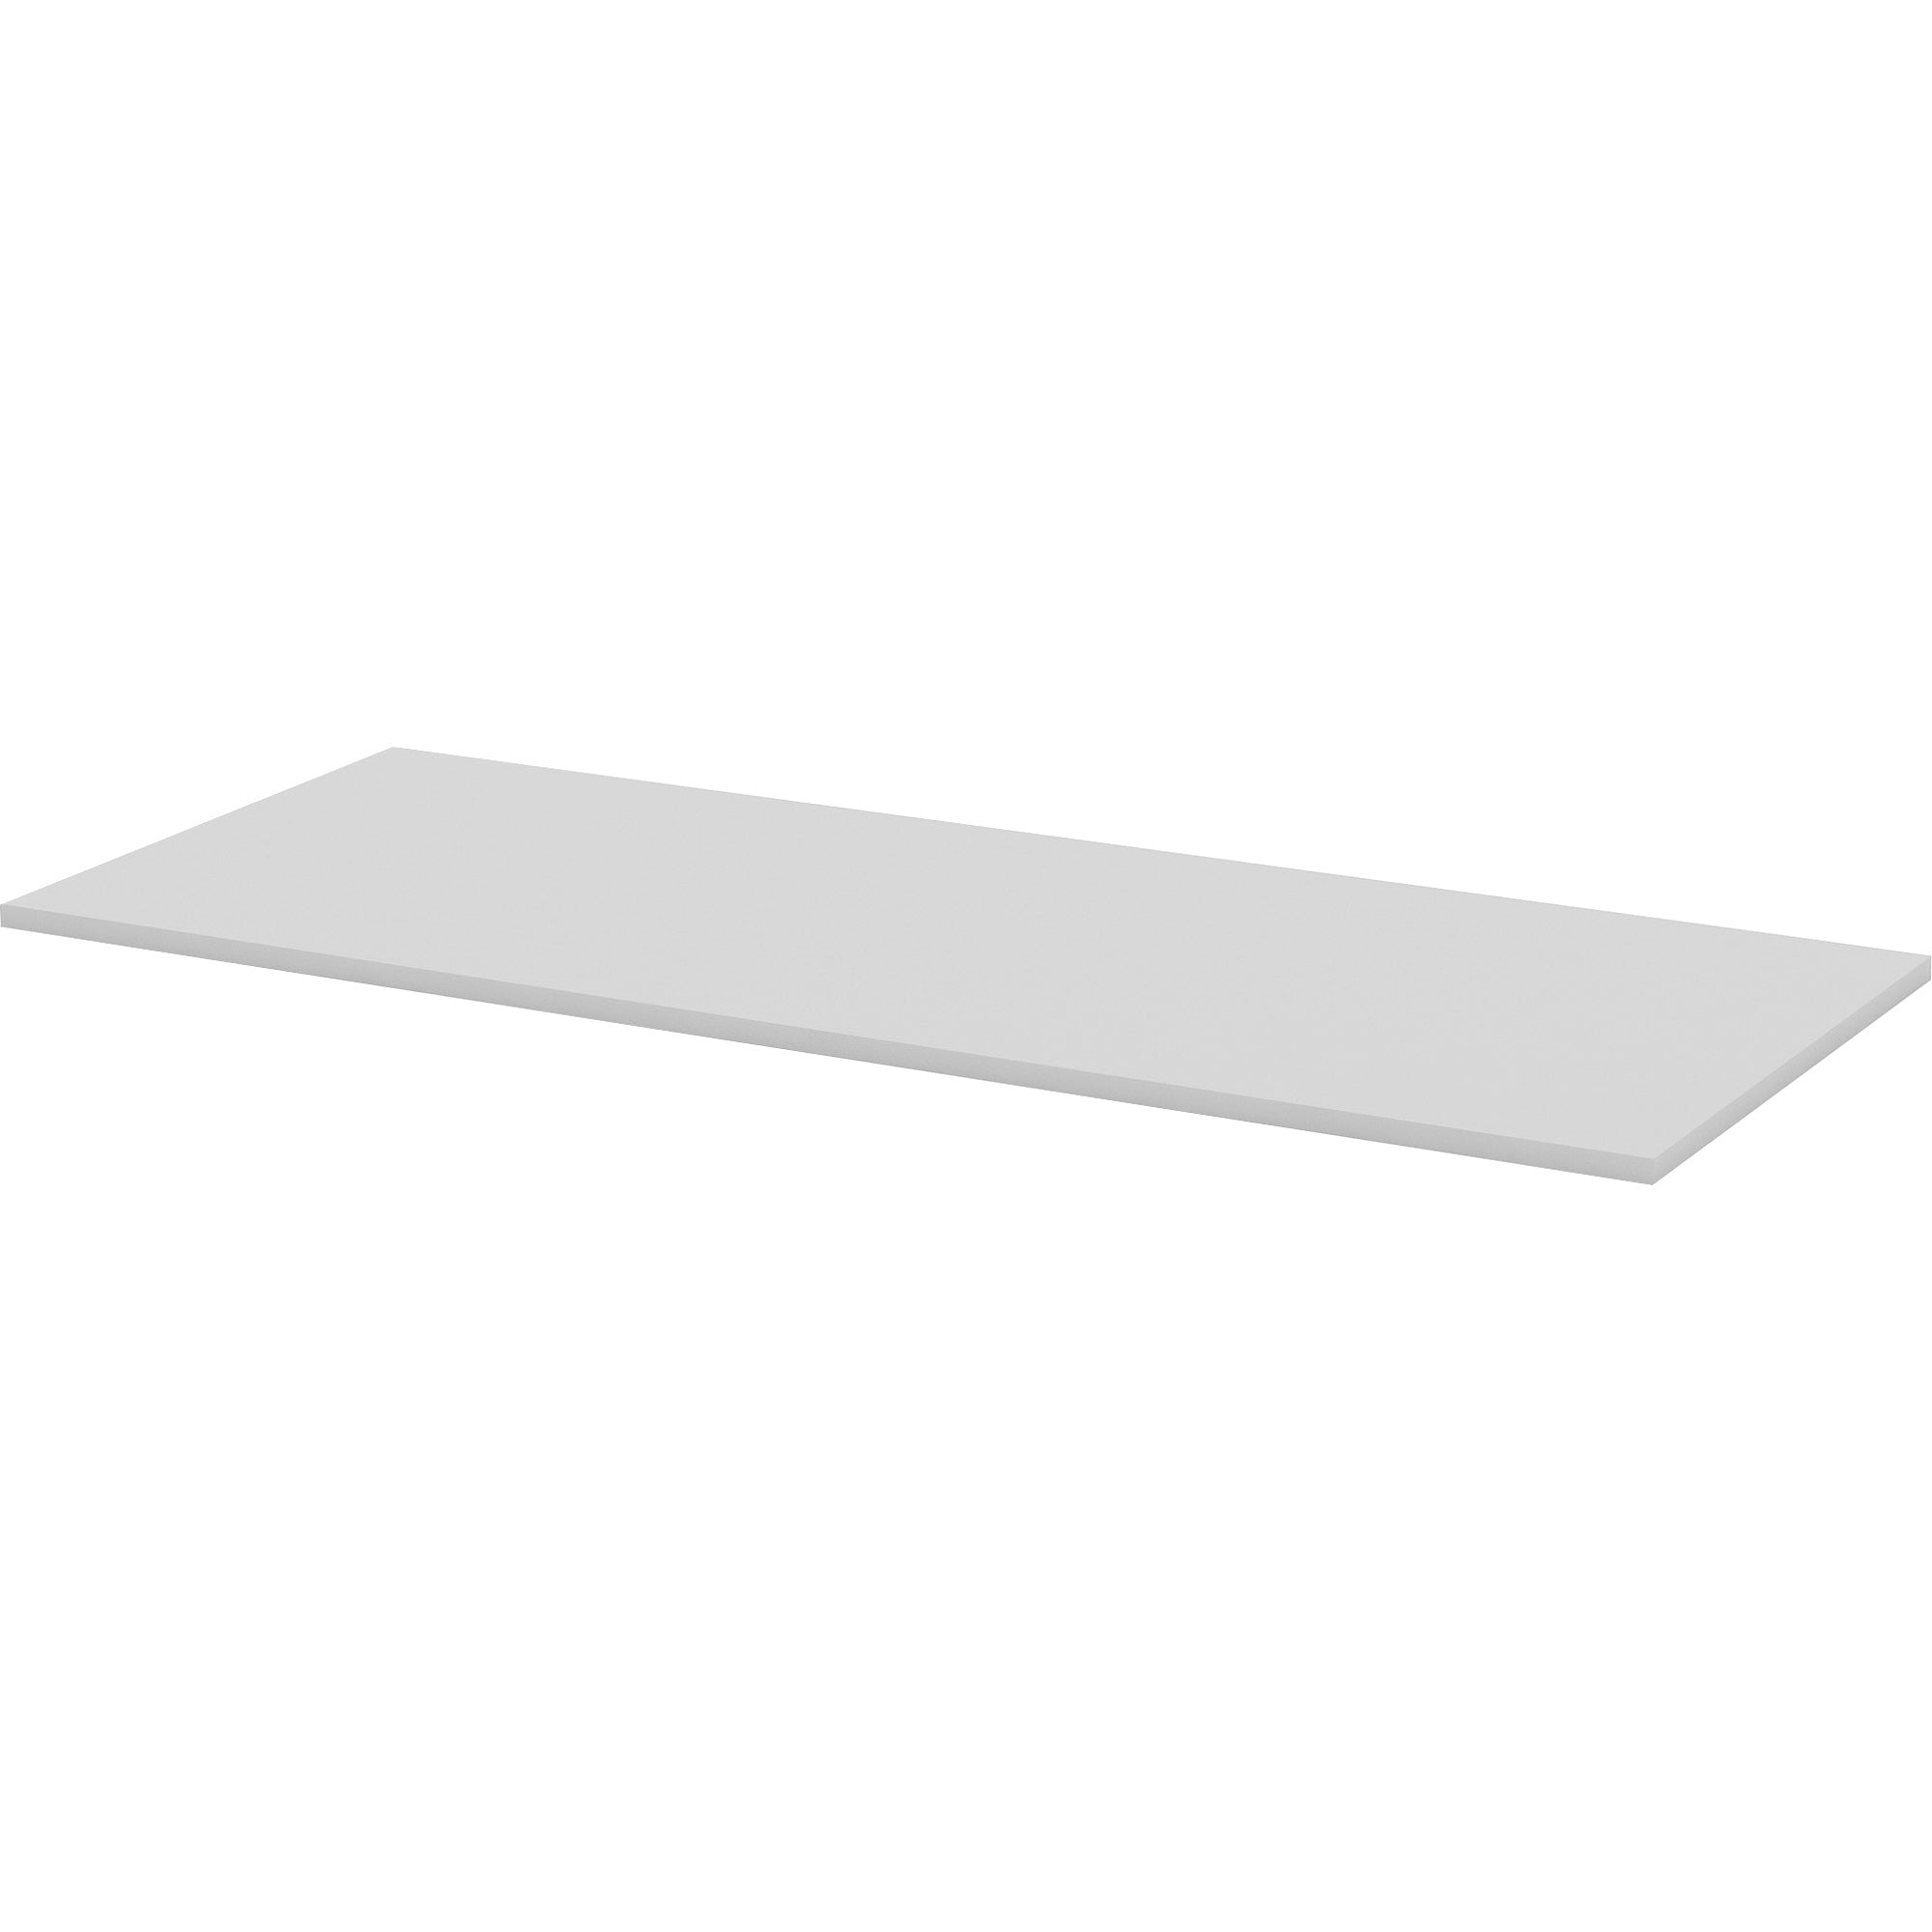 lorell-training-tabletop-for-table-topgray-rectangle-top-72-table-top-length-x-30-table-top-width-x-1-table-top-thickness-assembly-required-1-each_llr62560 - 1